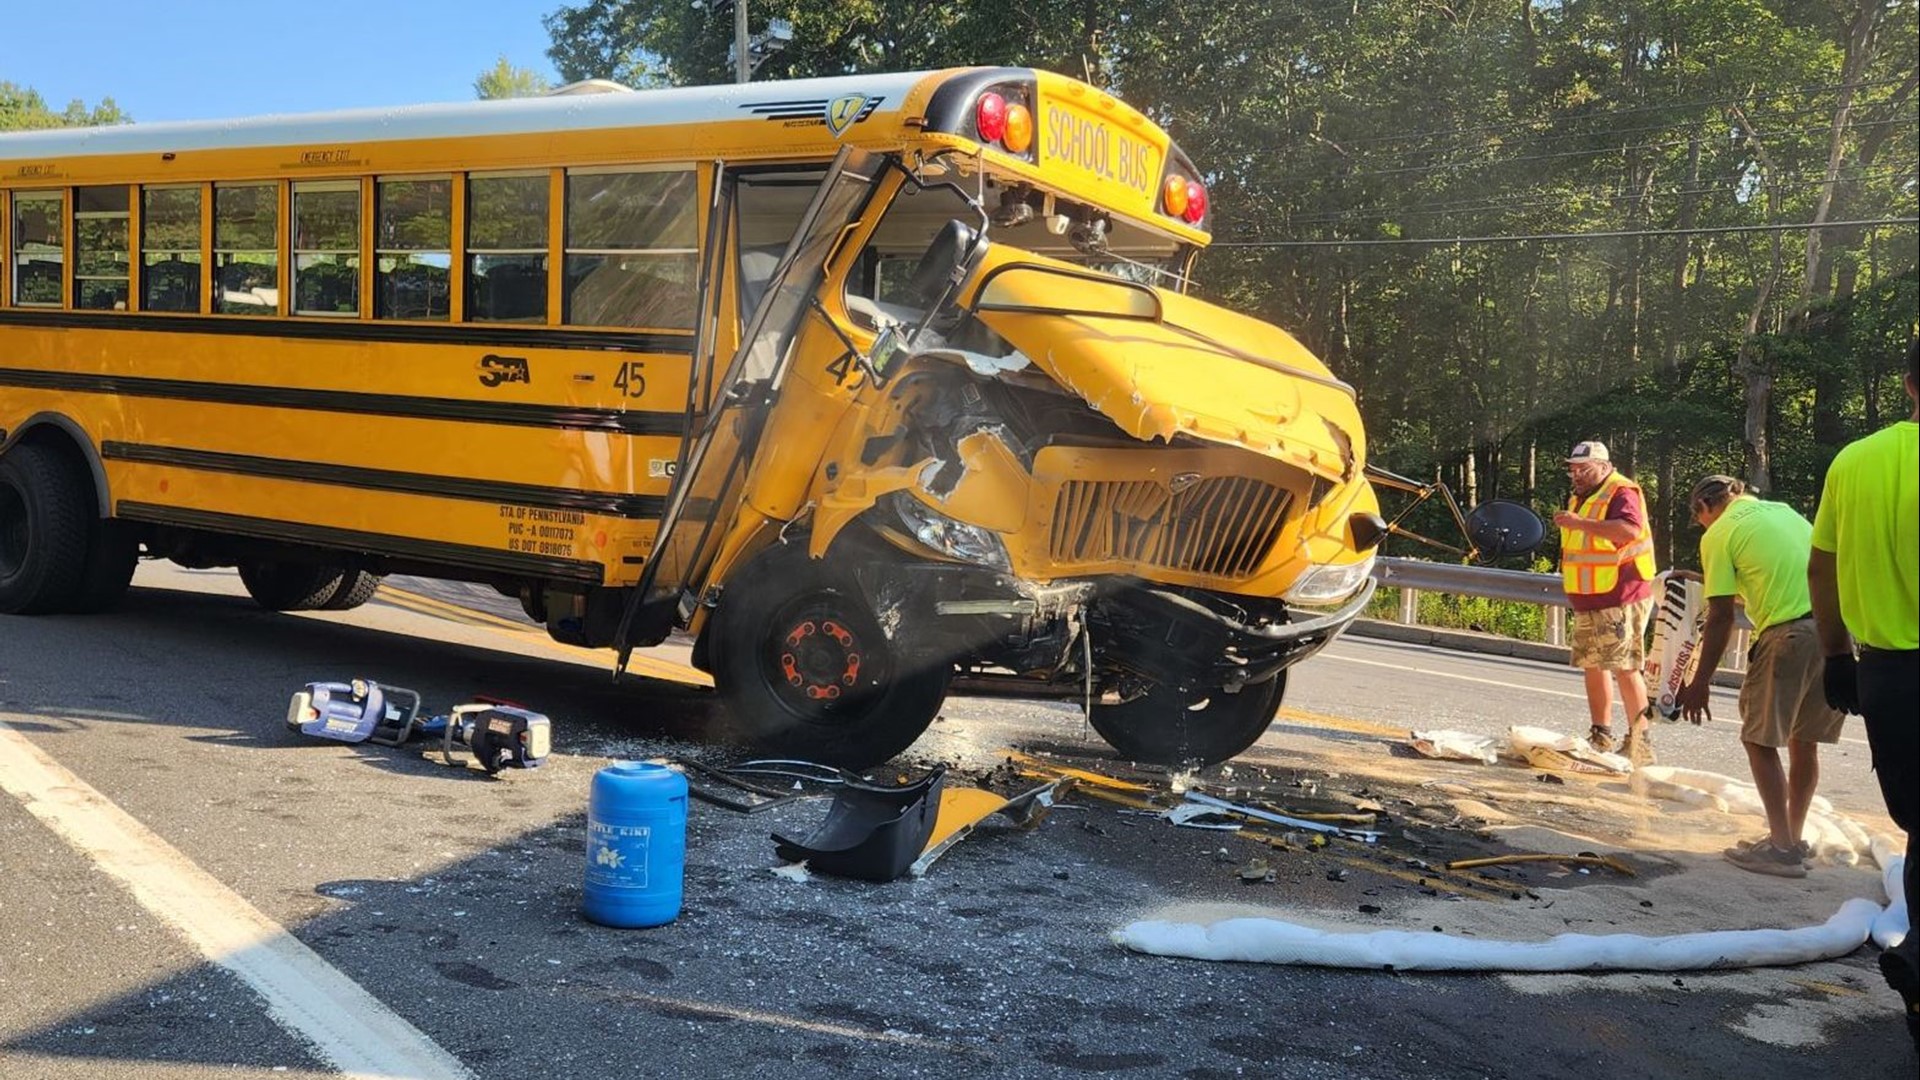 Pennsylvania State Police provide an update on a crash involving a school bus and truck in Bear Creek Township, Luzerne County.